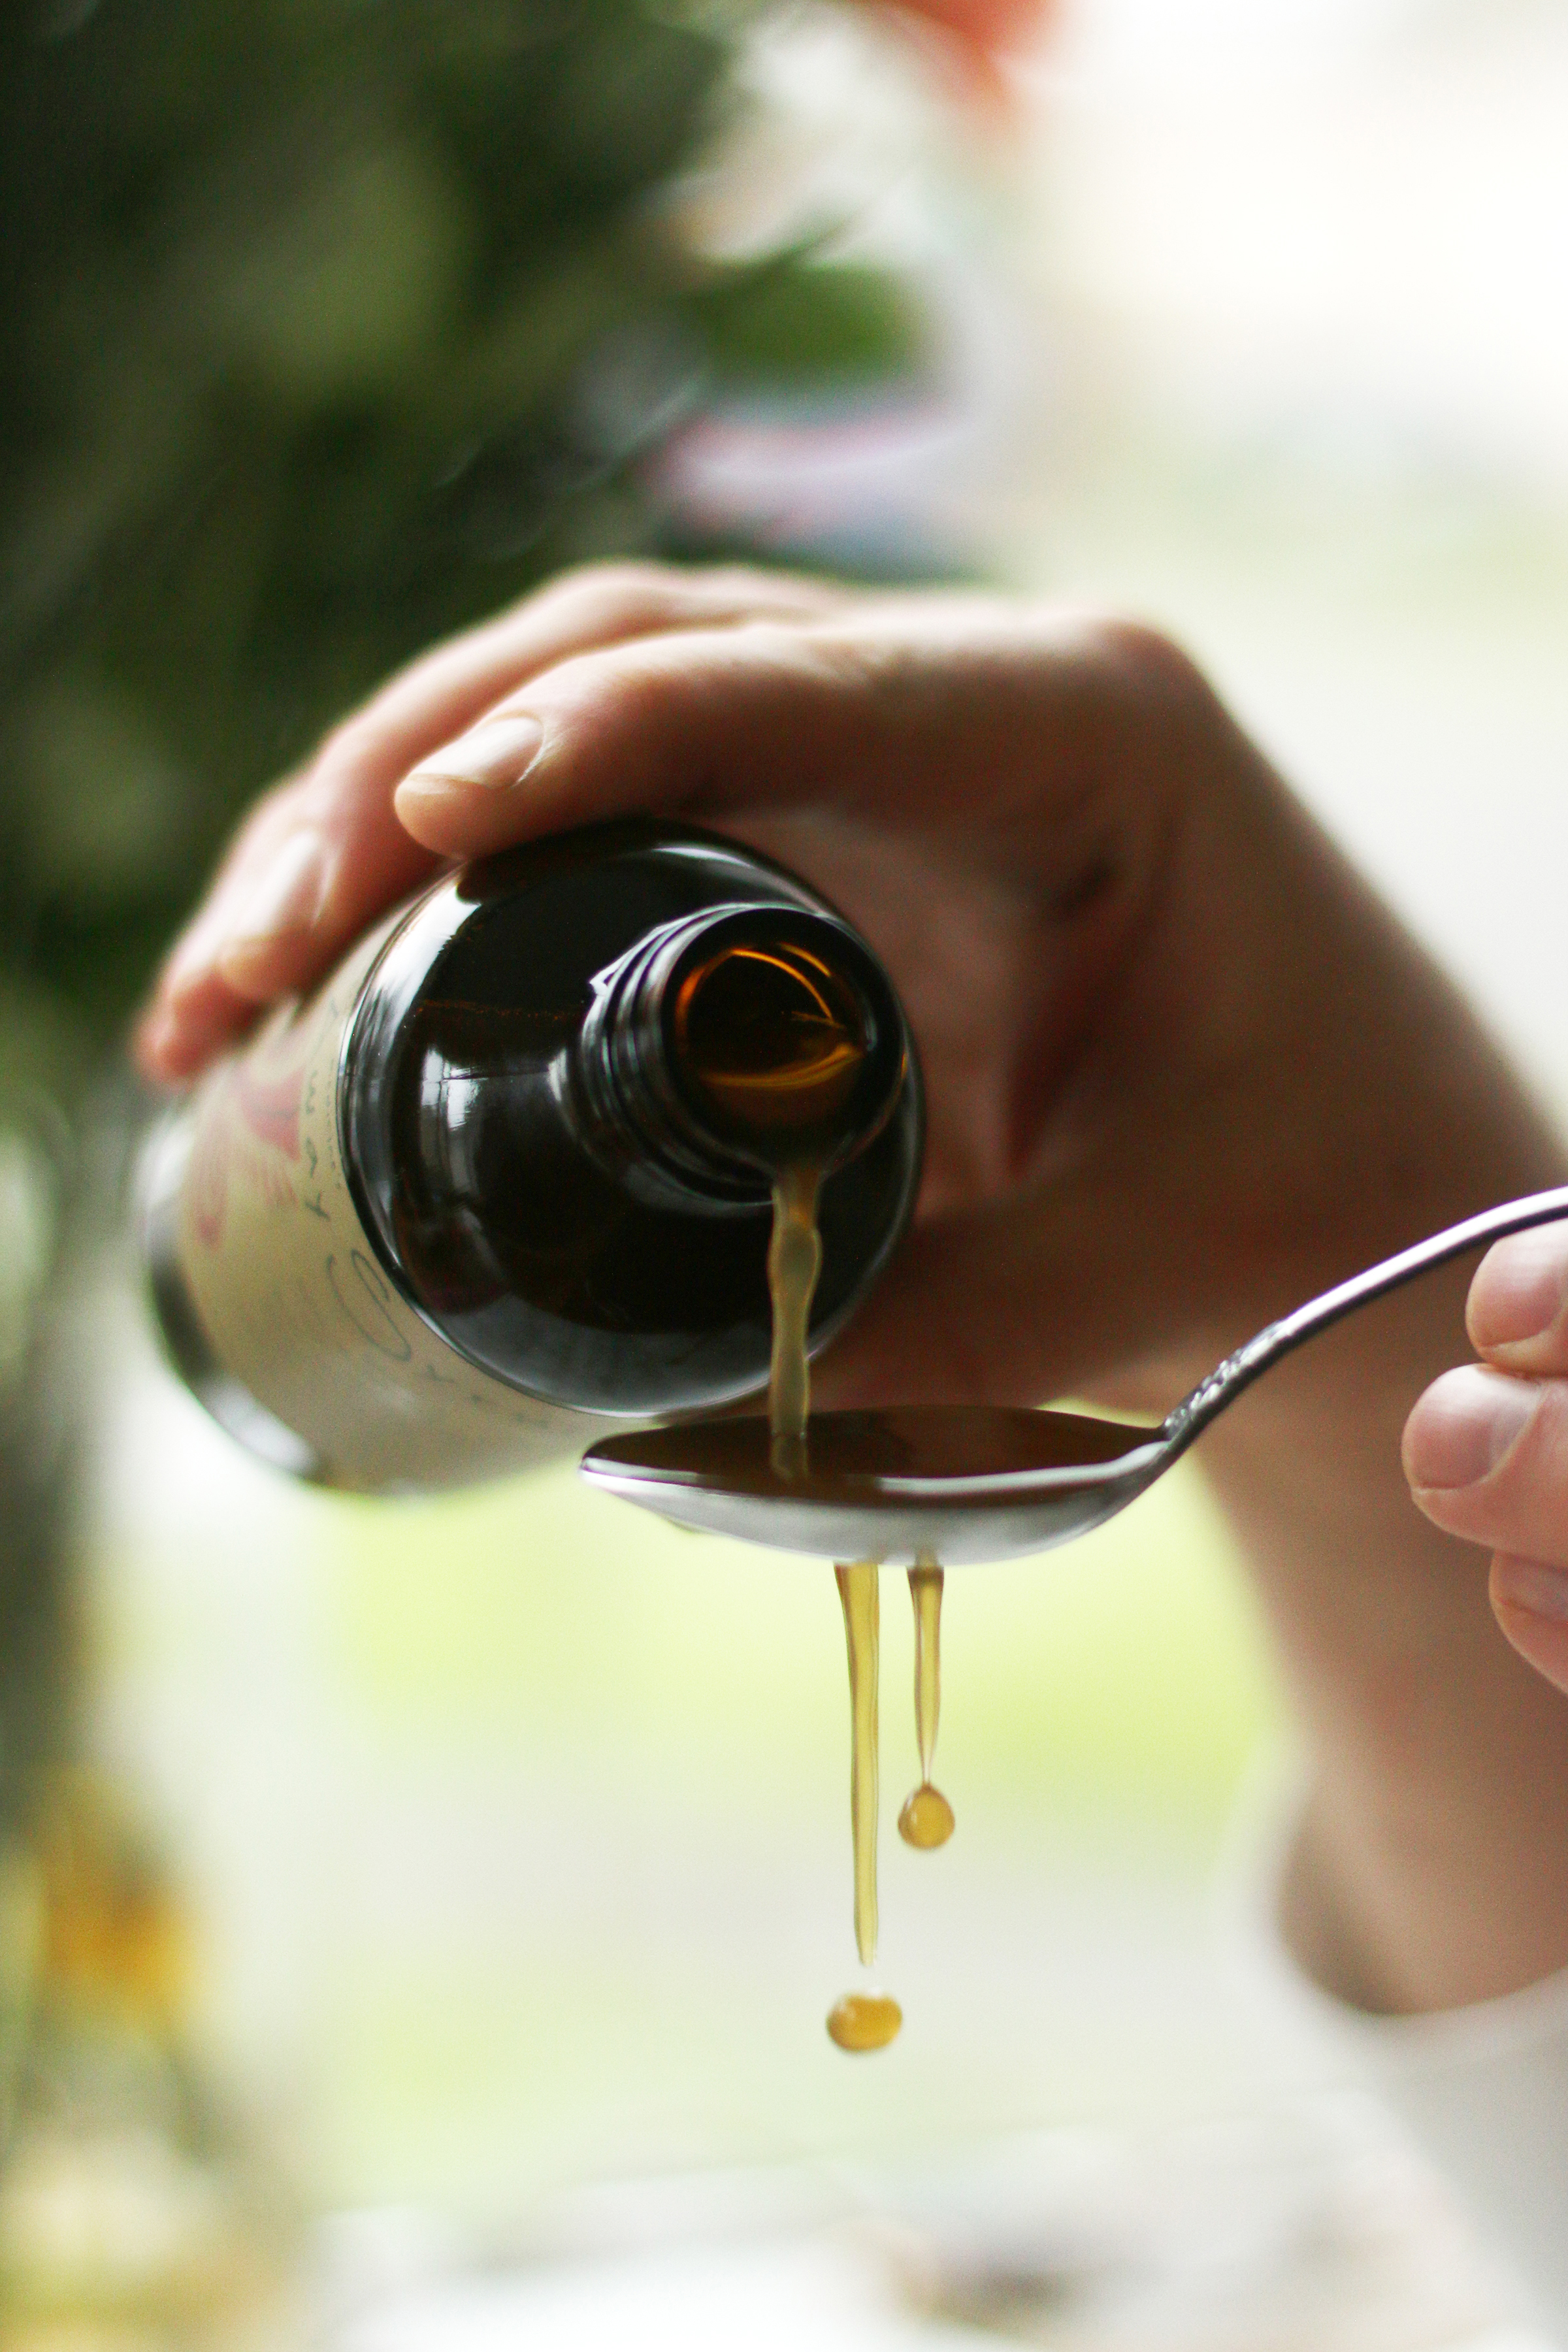 ashwagandha-syrup-being-poured-into-spoon-and-overflowing